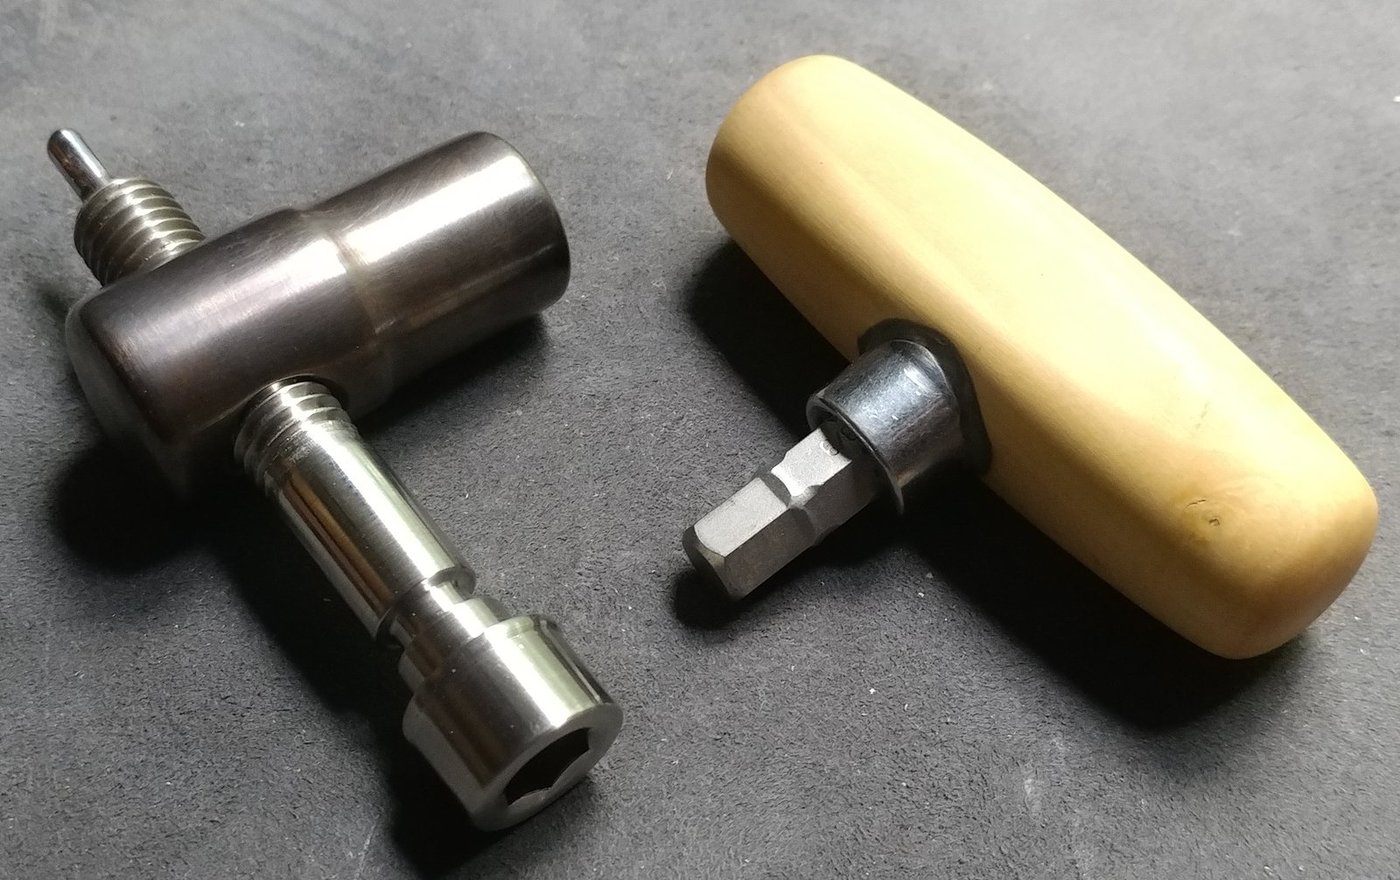 neck nut, bolt, and tool